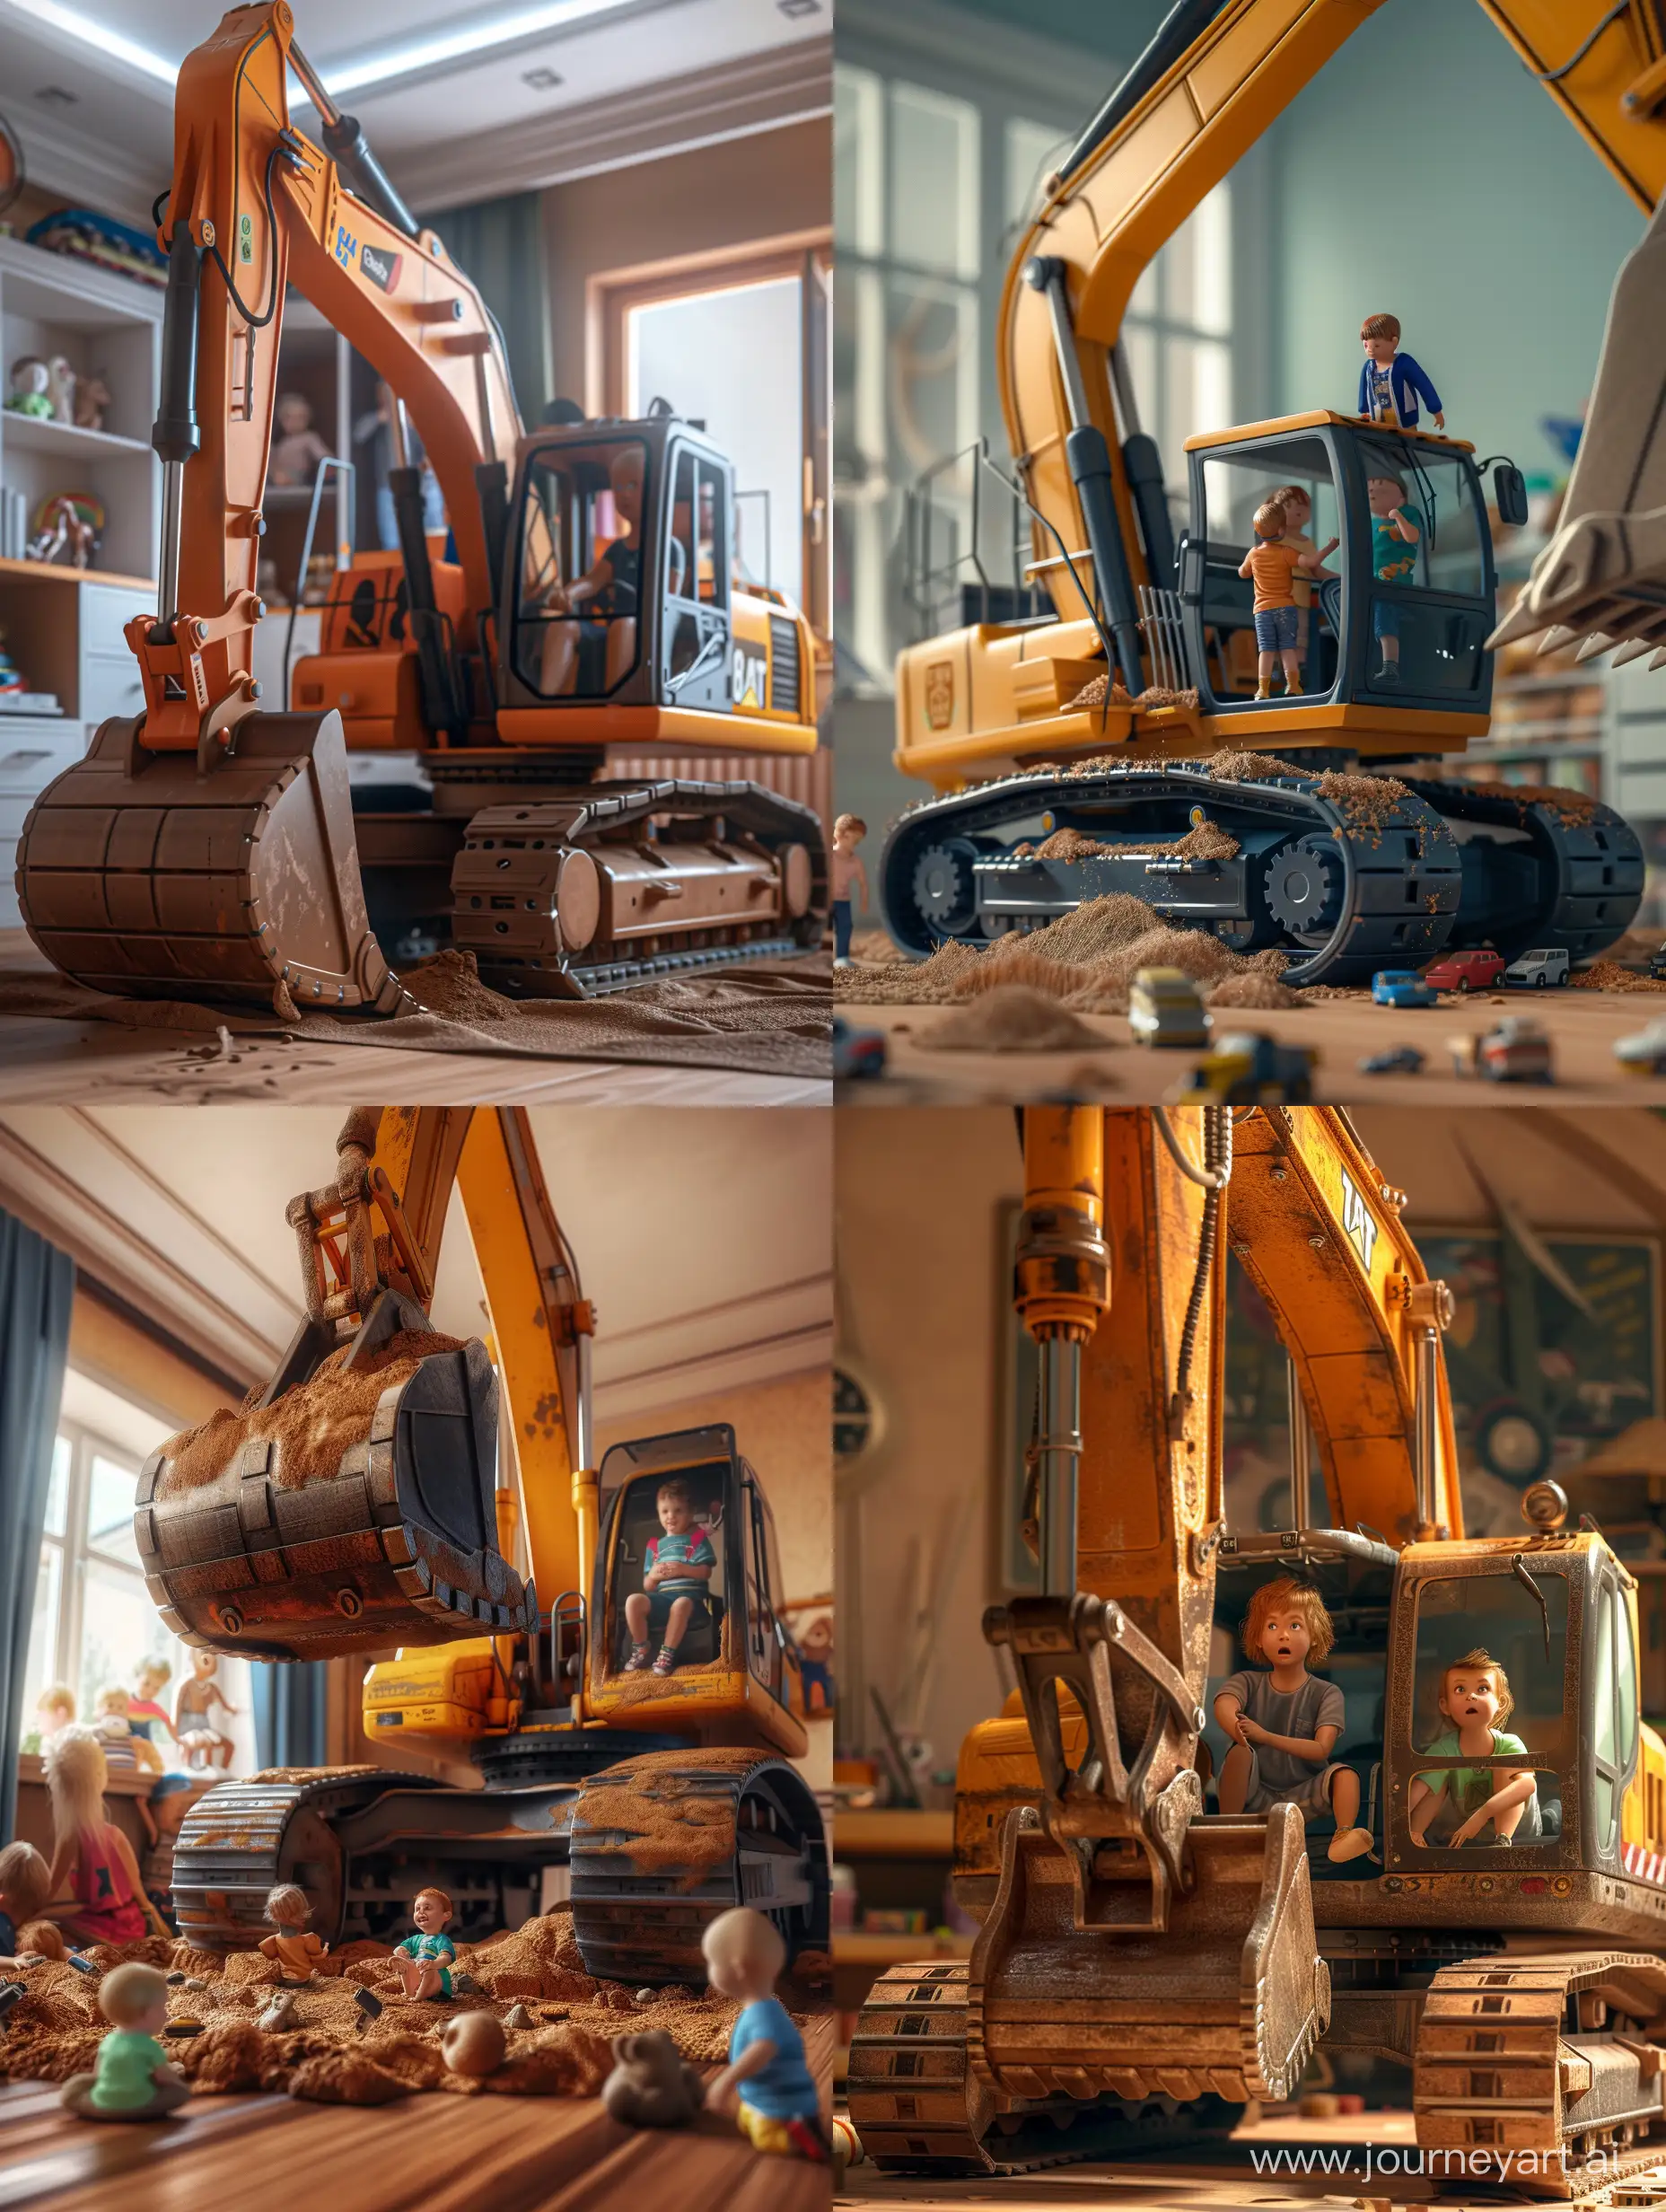 Children-Playing-in-Toy-Room-Excavator-Bucket-Hyperdetailed-Realistic-8K-HDR-Image